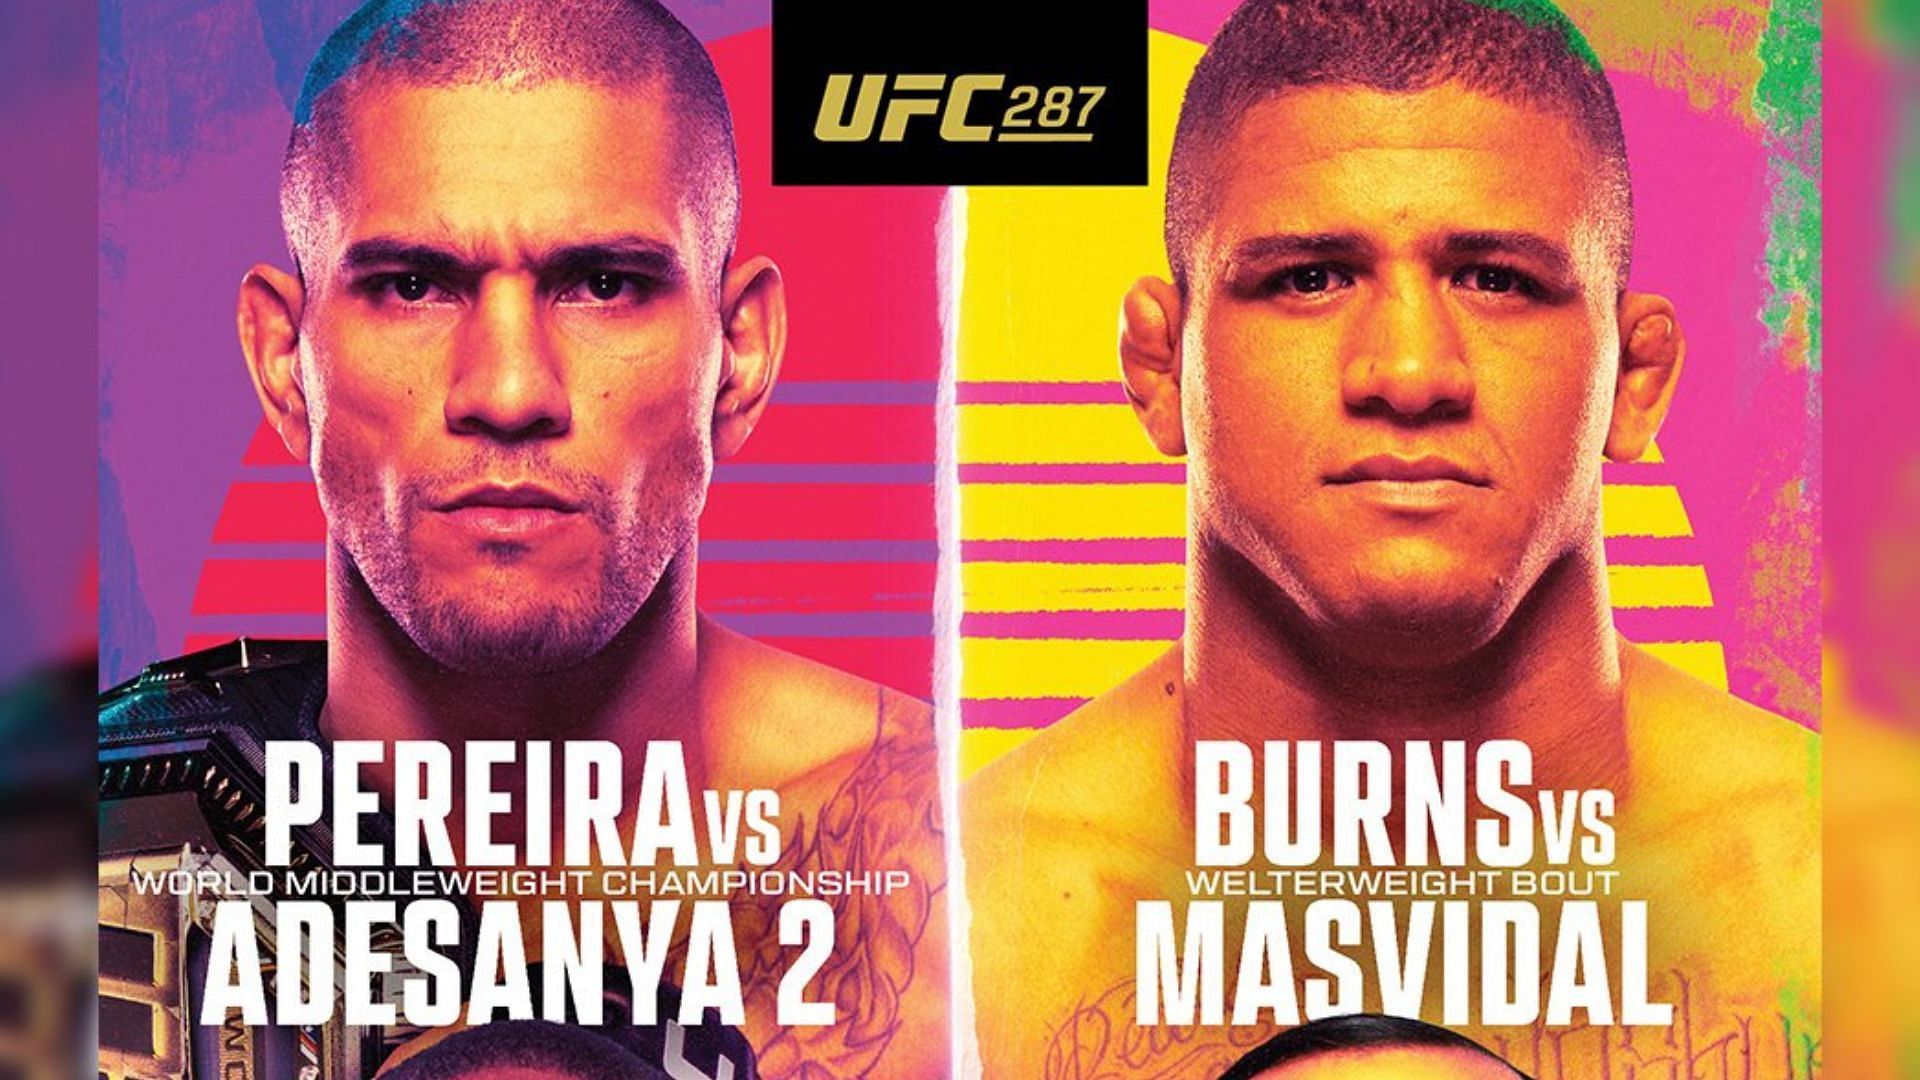 UFC 287 weighins UFC 287 weighin results Find out the official